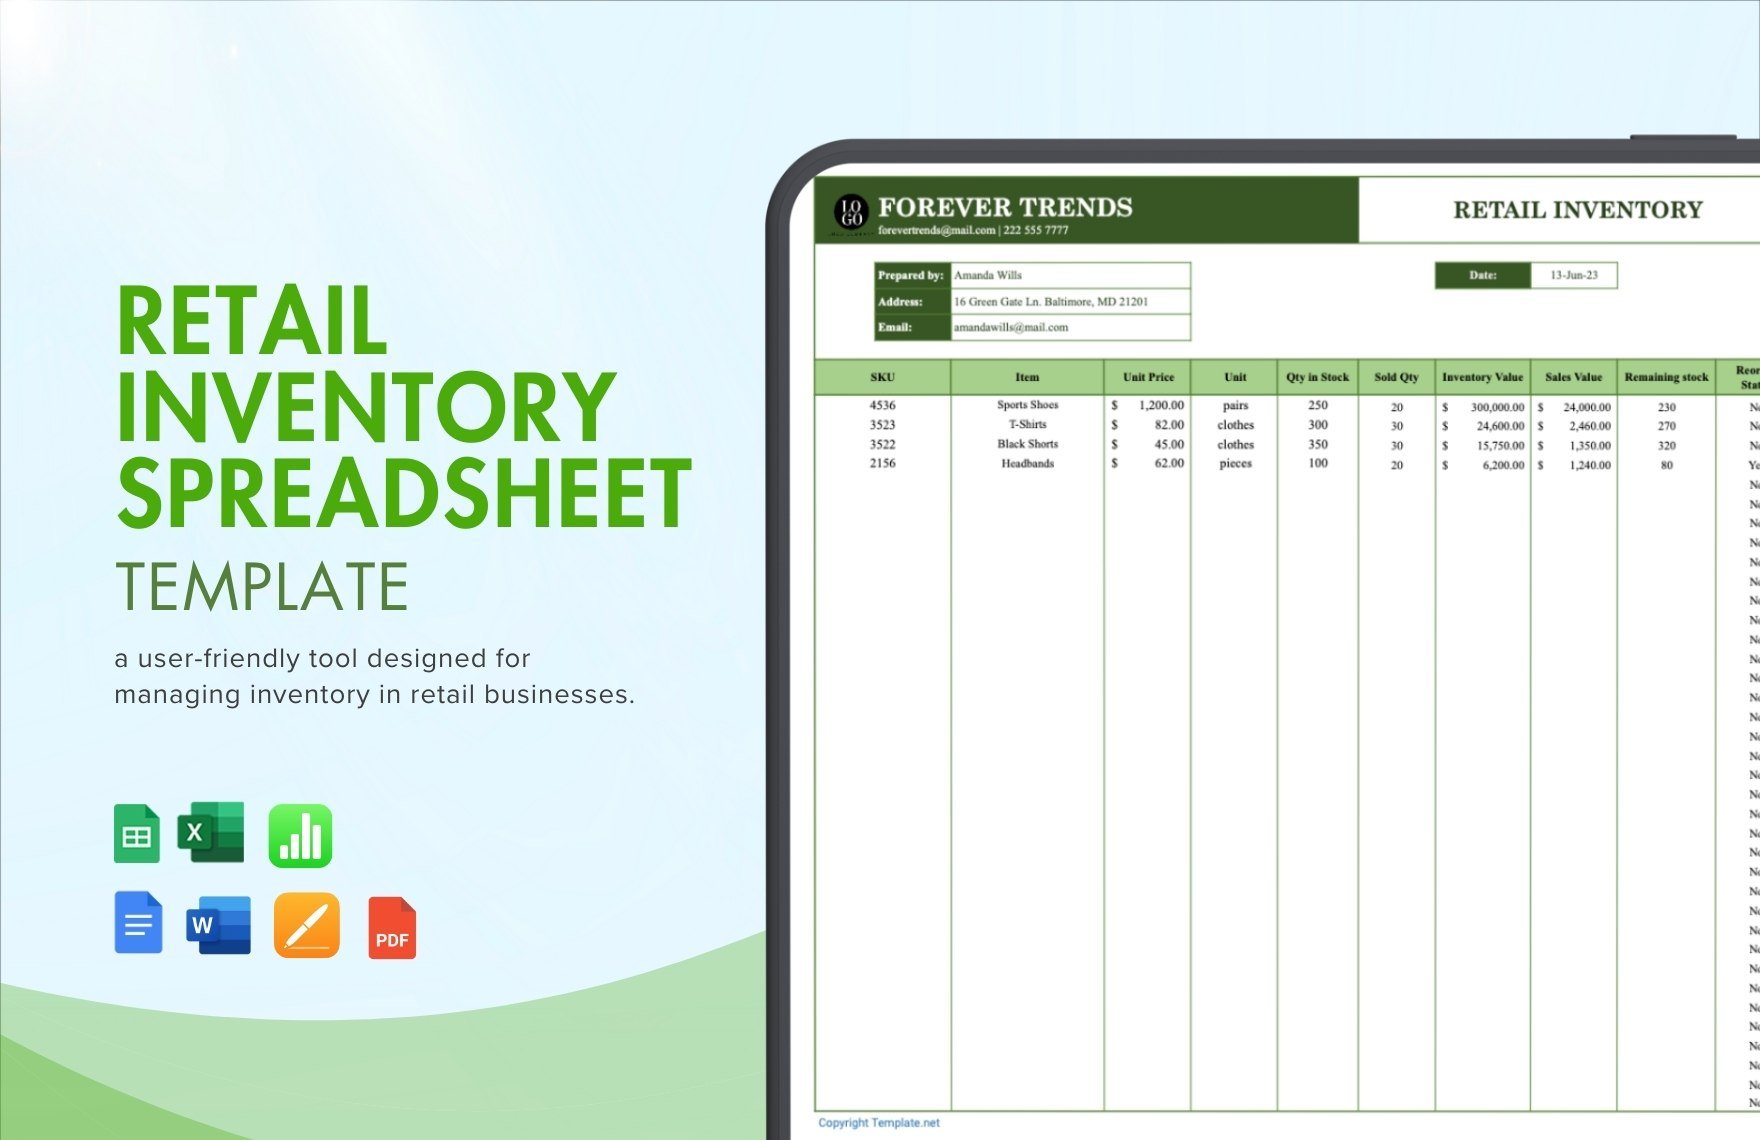 Retail Inventory Spreadsheet Template in Word, Google Docs, Excel, PDF, Google Sheets, Apple Pages, Apple Numbers